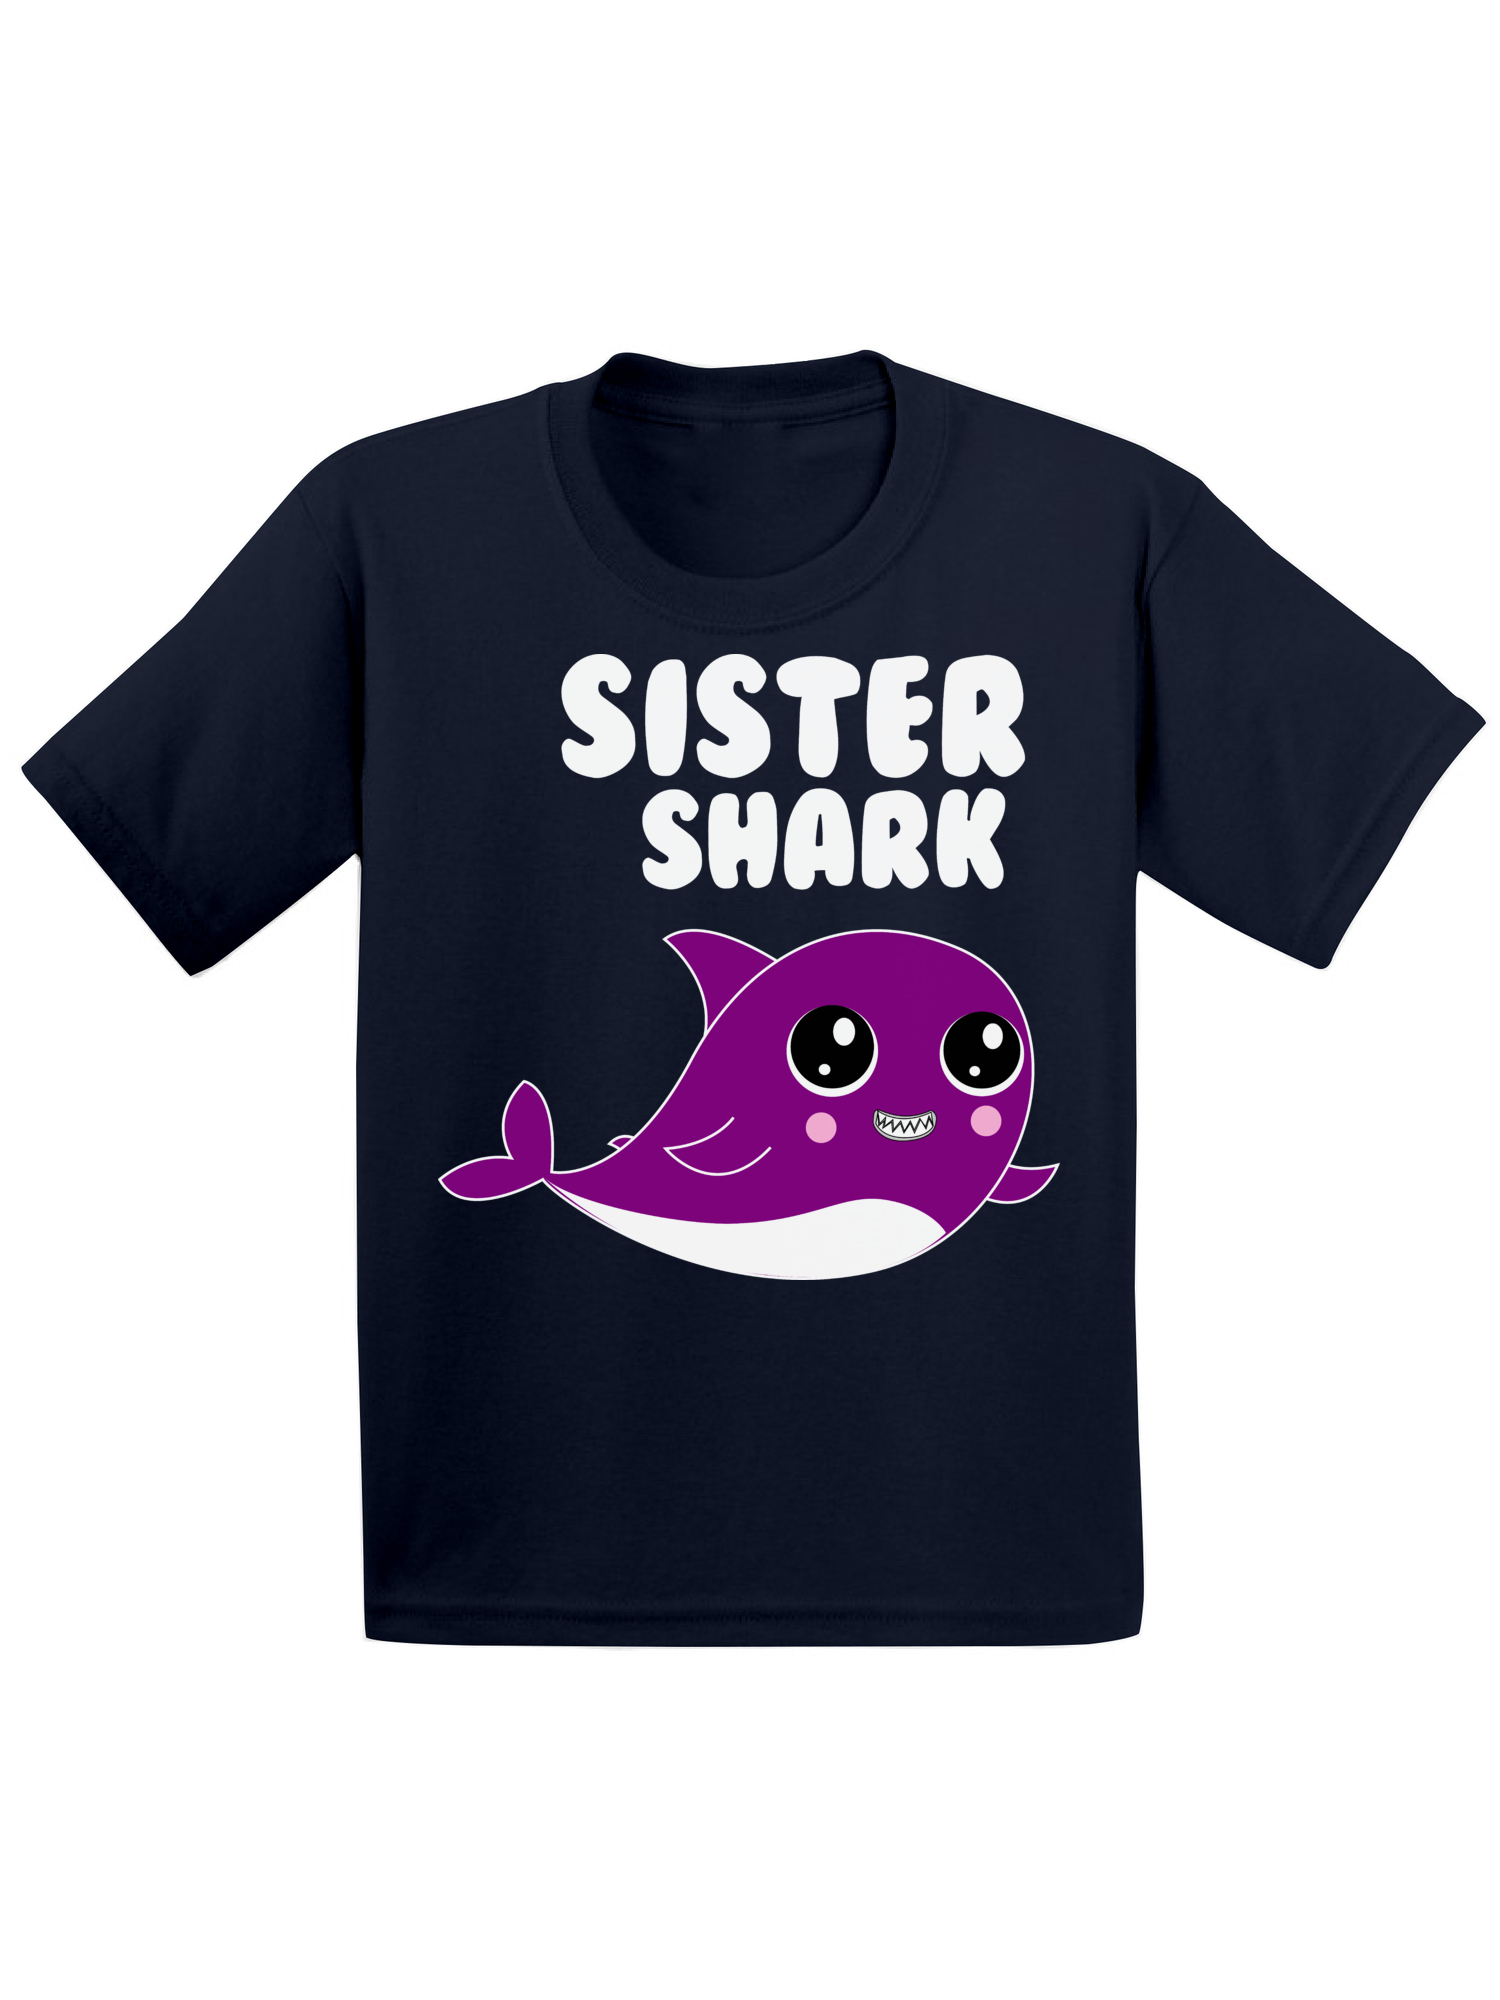 Awkward Styles Sister Shark Toddler T-Shirt Family Shirts Family Shirts Kids Shark T Shirt Matching Shark Shirts for Family Shark Birthday Party for Girls Shark Party Outfit for Baby Girl - image 1 of 4